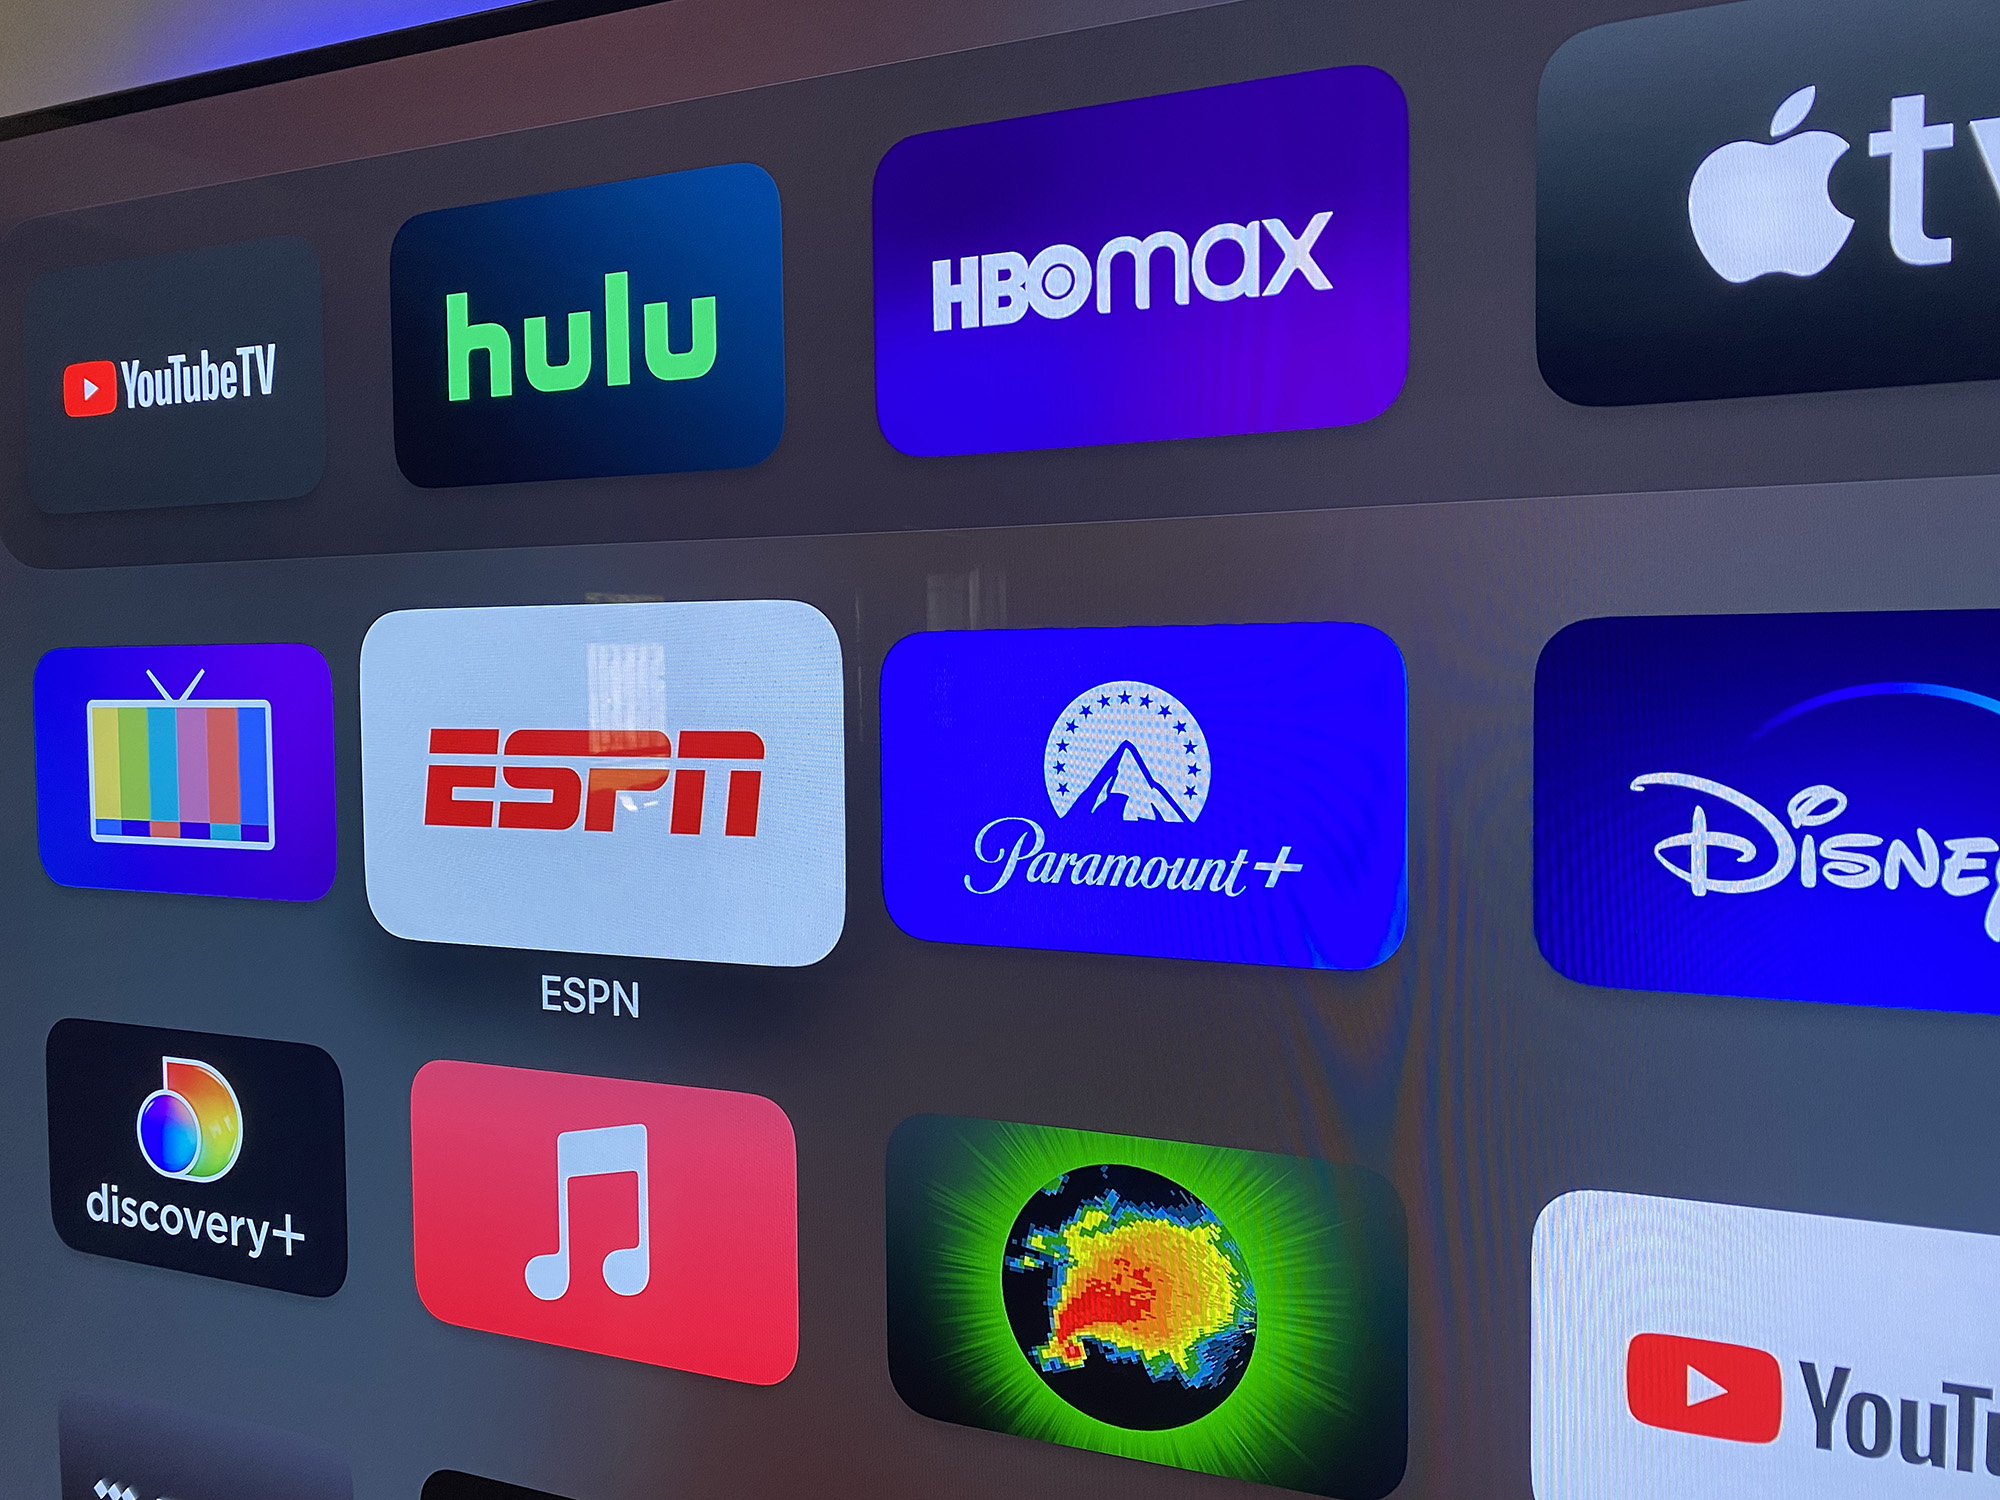 Cyber Monday streaming deals: Roku, Apple TV 4K, Disney+ and
more